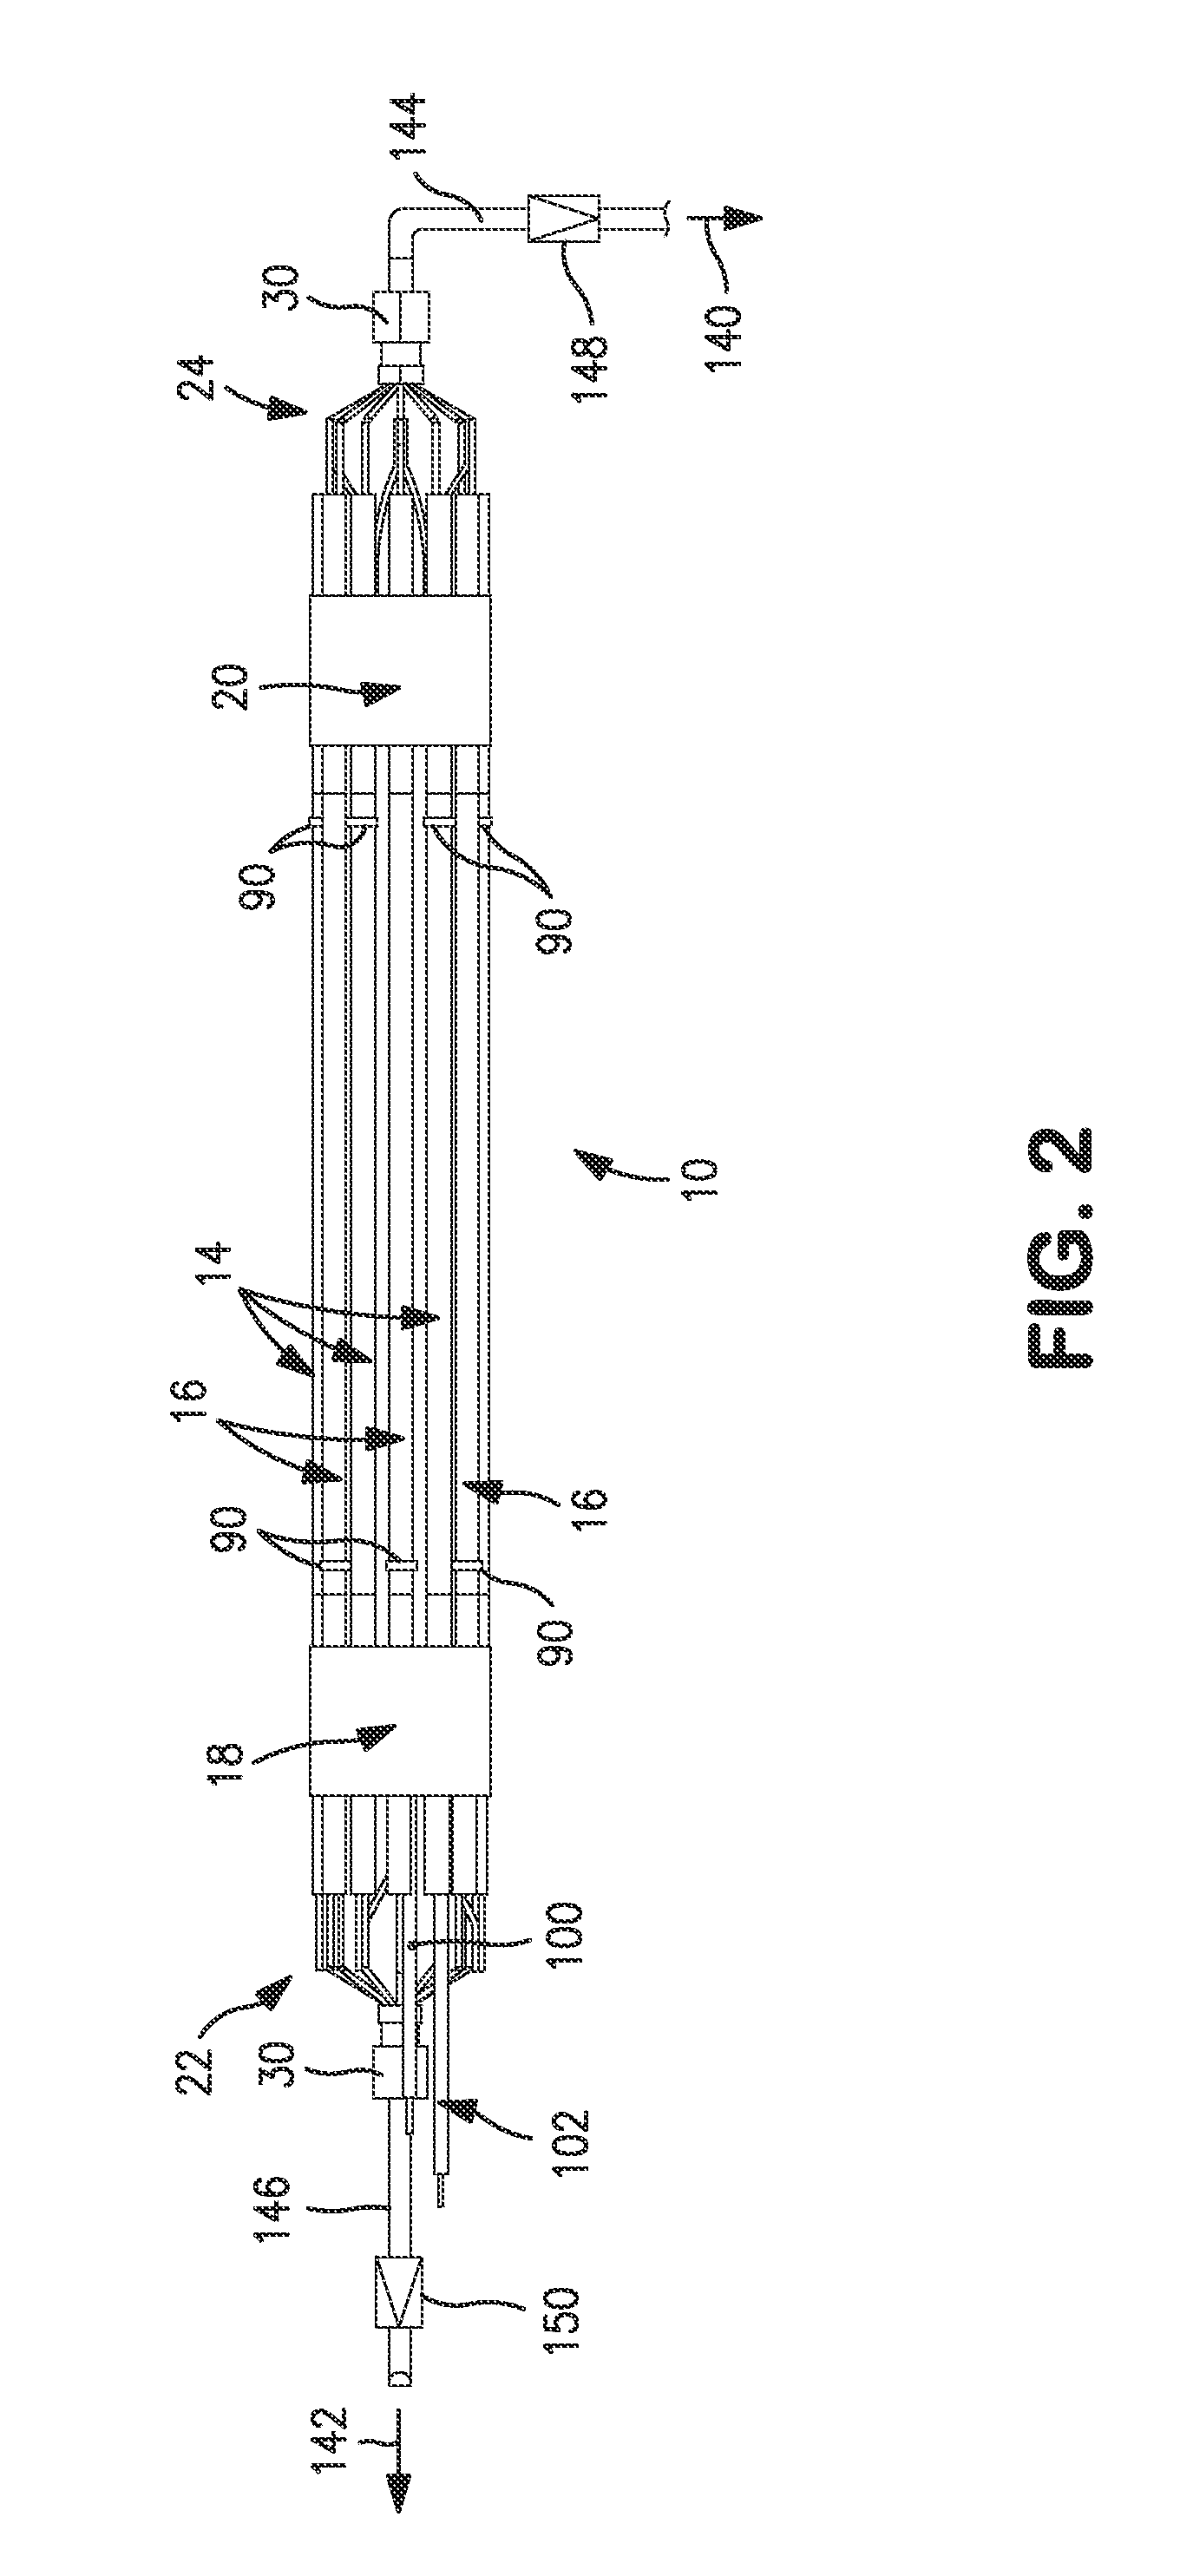 Oxygen separation module and apparatus